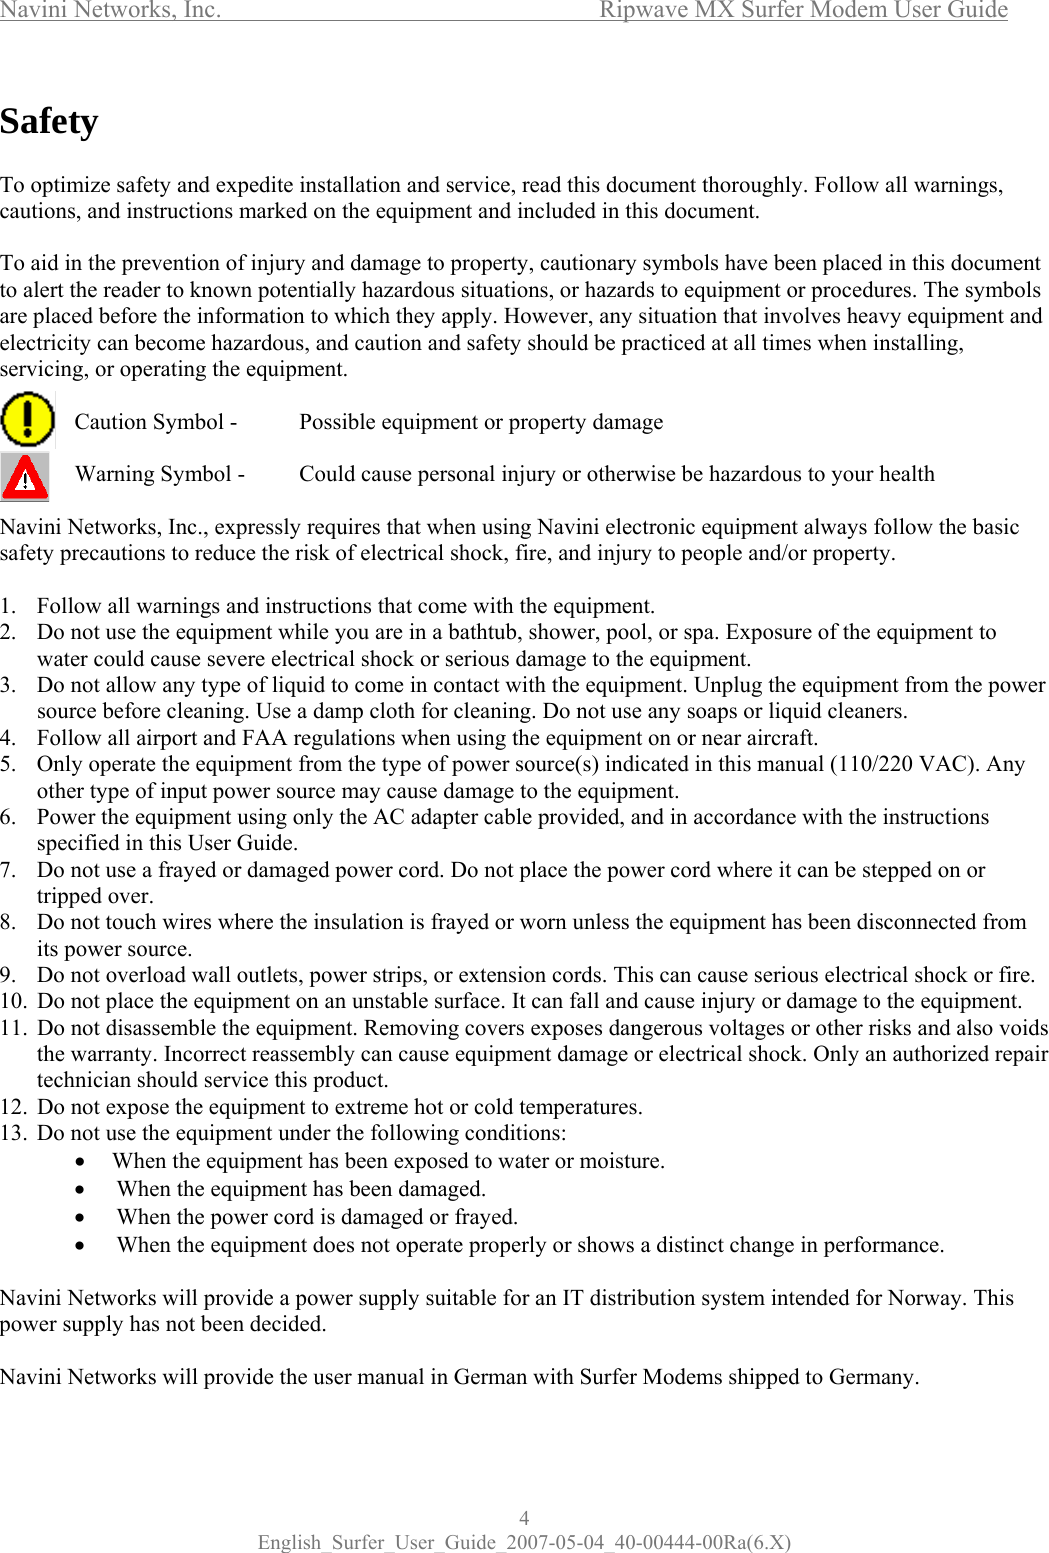 Navini Networks, Inc.           Ripwave MX Surfer Modem User Guide 4 English_Surfer_User_Guide_2007-05-04_40-00444-00Ra(6.X) Safety  To optimize safety and expedite installation and service, read this document thoroughly. Follow all warnings, cautions, and instructions marked on the equipment and included in this document.  To aid in the prevention of injury and damage to property, cautionary symbols have been placed in this document to alert the reader to known potentially hazardous situations, or hazards to equipment or procedures. The symbols are placed before the information to which they apply. However, any situation that involves heavy equipment and electricity can become hazardous, and caution and safety should be practiced at all times when installing, servicing, or operating the equipment.    Caution Symbol -   Possible equipment or property damage    Warning Symbol -   Could cause personal injury or otherwise be hazardous to your health  Navini Networks, Inc., expressly requires that when using Navini electronic equipment always follow the basic safety precautions to reduce the risk of electrical shock, fire, and injury to people and/or property.  1.  Follow all warnings and instructions that come with the equipment. 2.  Do not use the equipment while you are in a bathtub, shower, pool, or spa. Exposure of the equipment to water could cause severe electrical shock or serious damage to the equipment. 3.  Do not allow any type of liquid to come in contact with the equipment. Unplug the equipment from the power source before cleaning. Use a damp cloth for cleaning. Do not use any soaps or liquid cleaners. 4.  Follow all airport and FAA regulations when using the equipment on or near aircraft. 5.  Only operate the equipment from the type of power source(s) indicated in this manual (110/220 VAC). Any other type of input power source may cause damage to the equipment. 6.  Power the equipment using only the AC adapter cable provided, and in accordance with the instructions specified in this User Guide. 7.  Do not use a frayed or damaged power cord. Do not place the power cord where it can be stepped on or tripped over. 8.  Do not touch wires where the insulation is frayed or worn unless the equipment has been disconnected from its power source. 9.  Do not overload wall outlets, power strips, or extension cords. This can cause serious electrical shock or fire.  10.  Do not place the equipment on an unstable surface. It can fall and cause injury or damage to the equipment. 11.  Do not disassemble the equipment. Removing covers exposes dangerous voltages or other risks and also voids the warranty. Incorrect reassembly can cause equipment damage or electrical shock. Only an authorized repair technician should service this product.  12.  Do not expose the equipment to extreme hot or cold temperatures. 13.  Do not use the equipment under the following conditions: •  When the equipment has been exposed to water or moisture. •   When the equipment has been damaged. •  When the power cord is damaged or frayed. •  When the equipment does not operate properly or shows a distinct change in performance.  Navini Networks will provide a power supply suitable for an IT distribution system intended for Norway. This power supply has not been decided.   Navini Networks will provide the user manual in German with Surfer Modems shipped to Germany. 